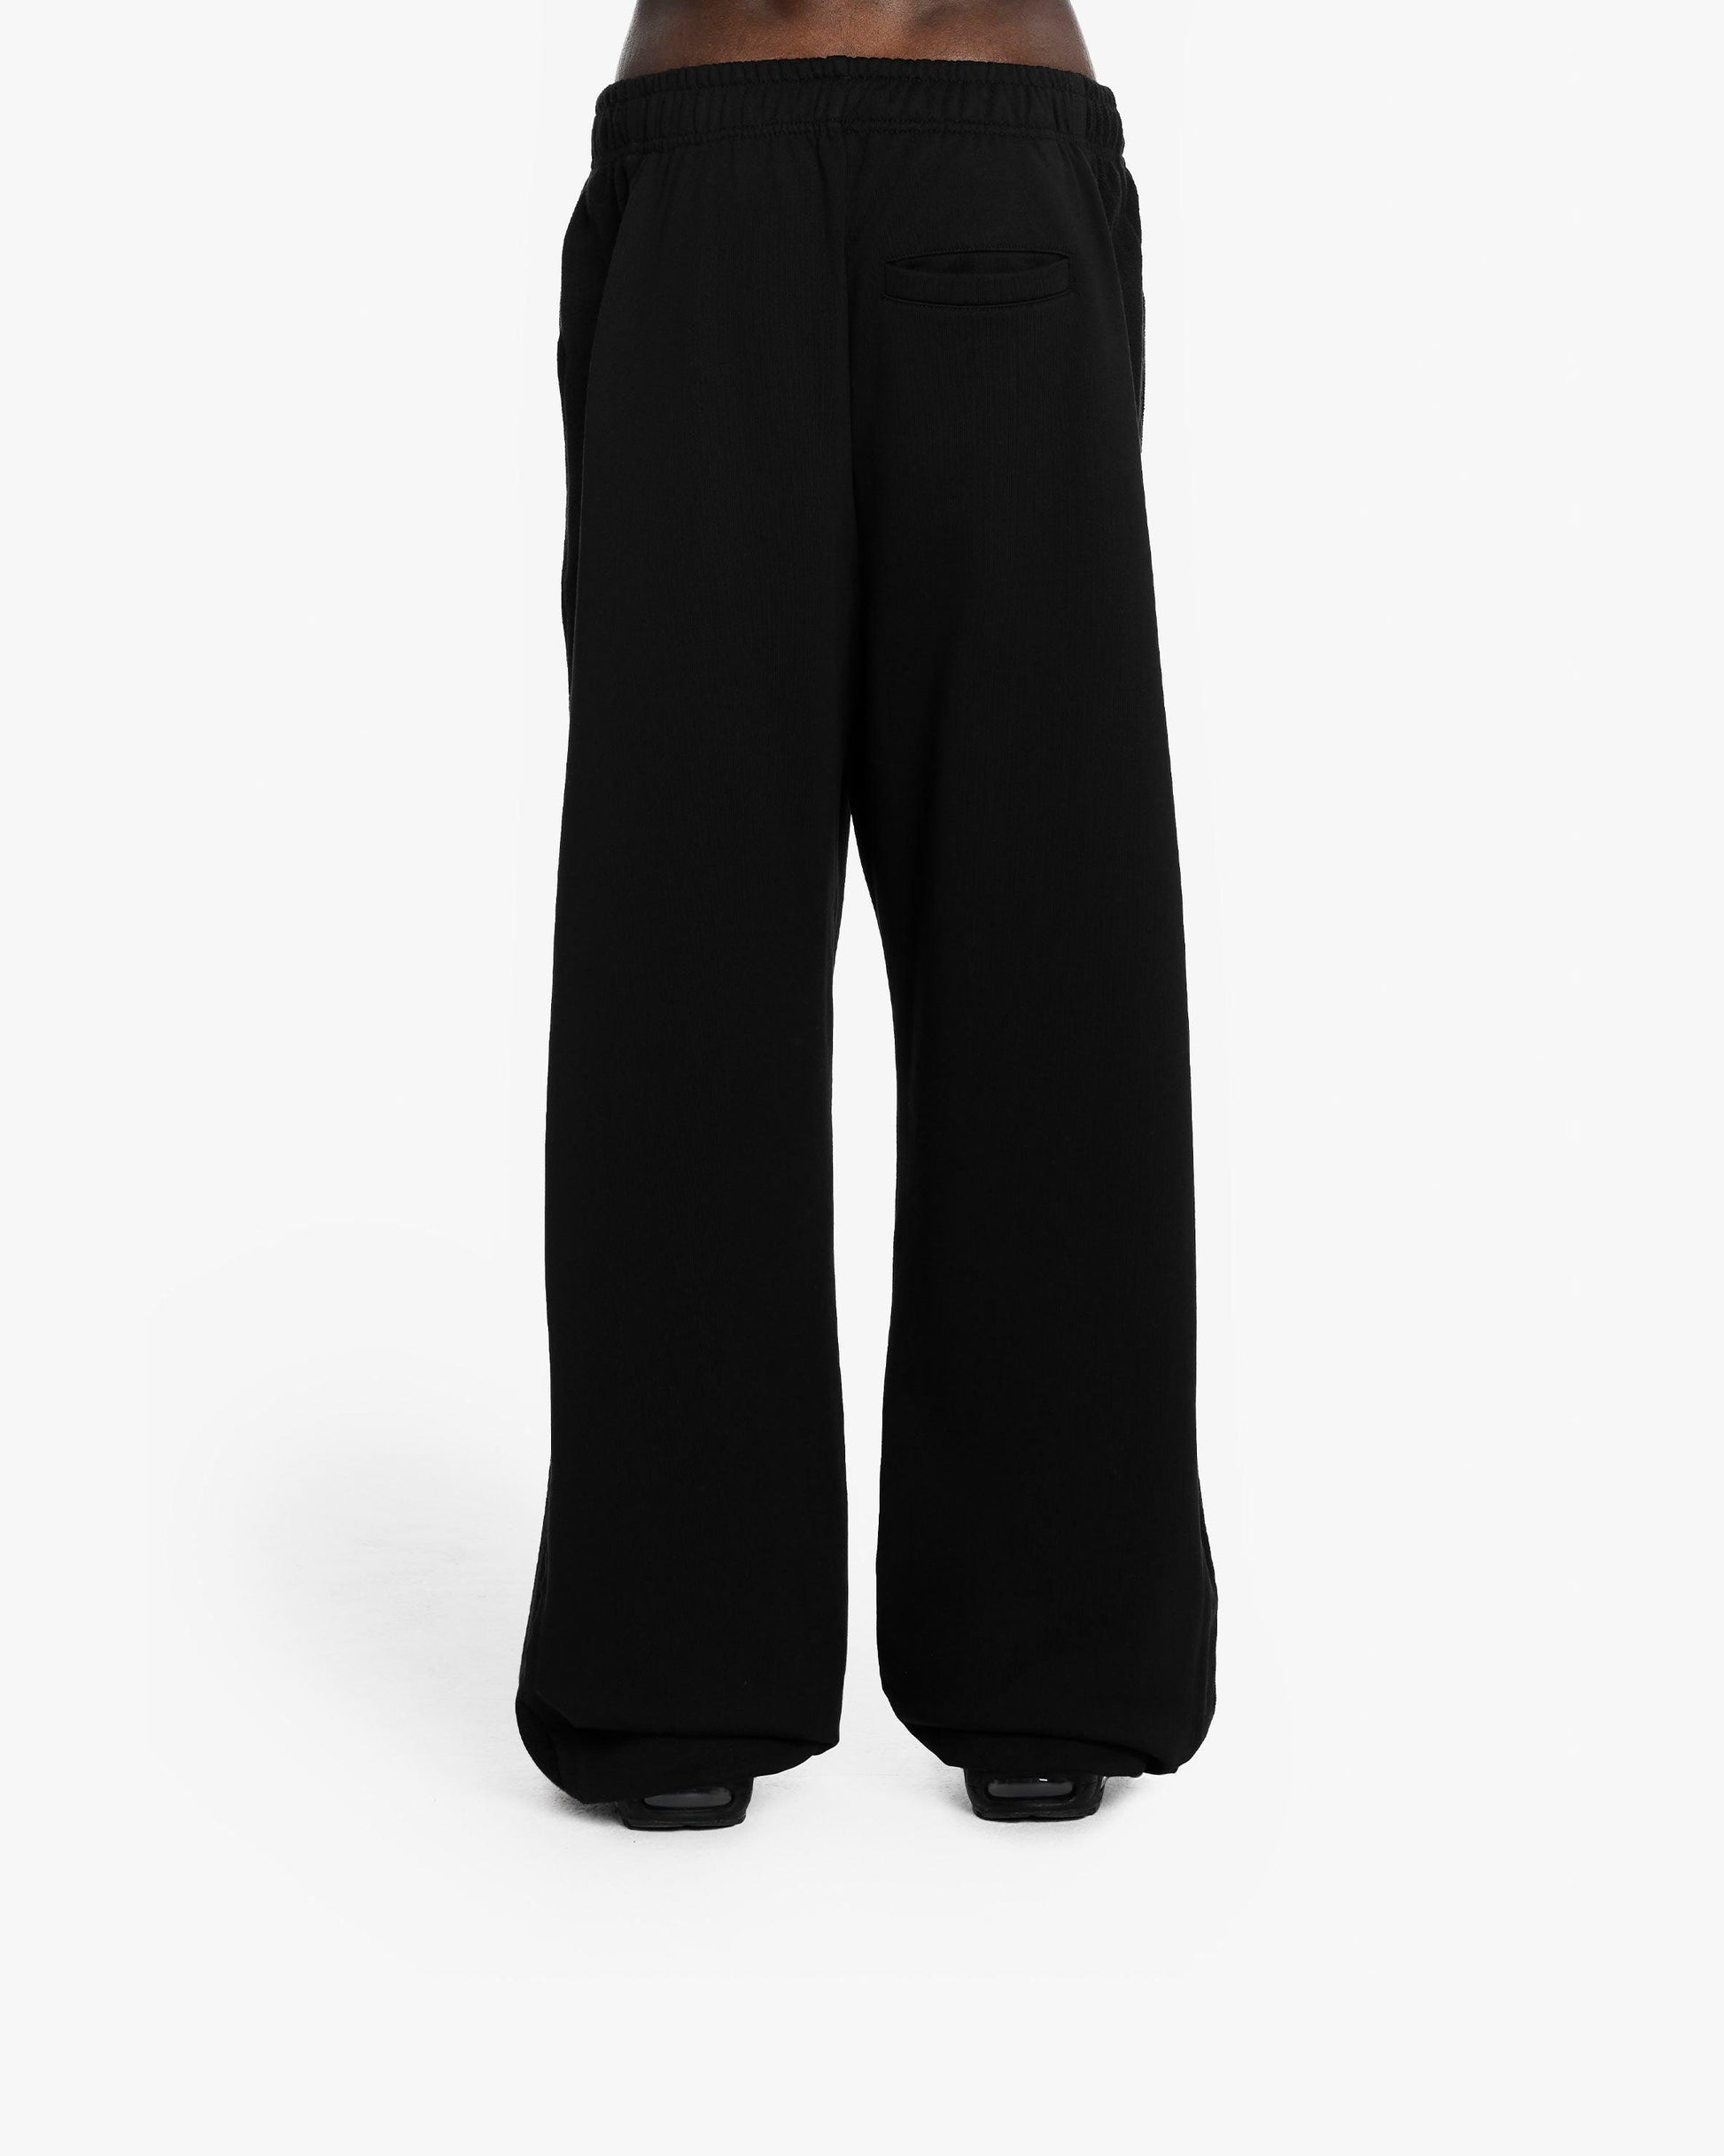 INSIDE OUT JOGGER BLACK - VICINITY